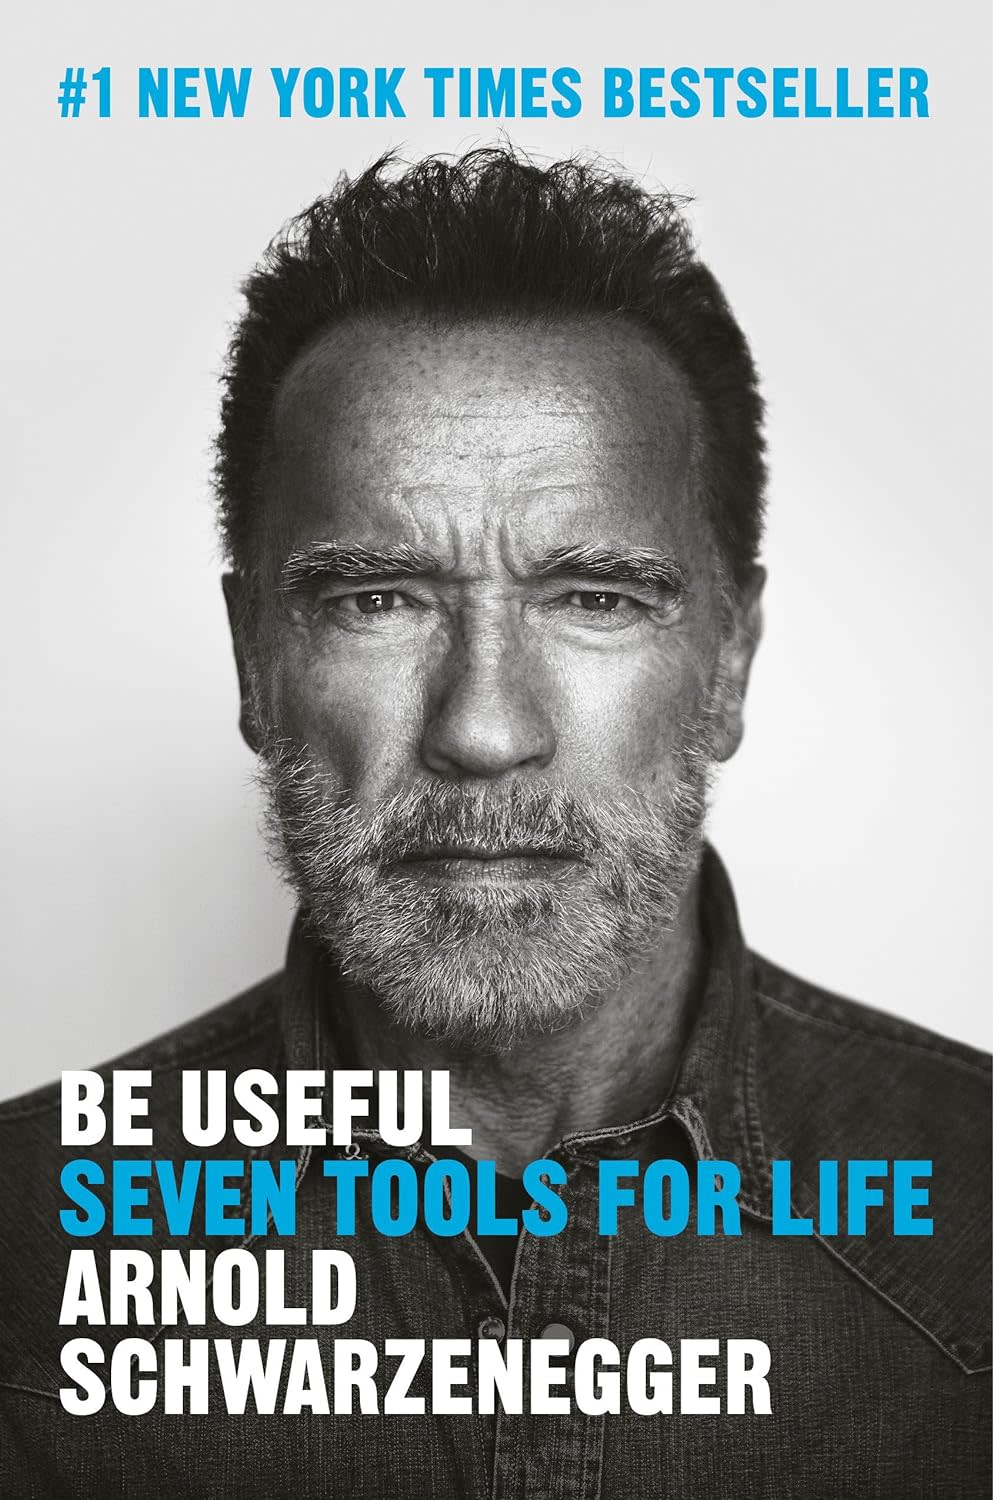 "Be Useful: Seven Tools for Life"